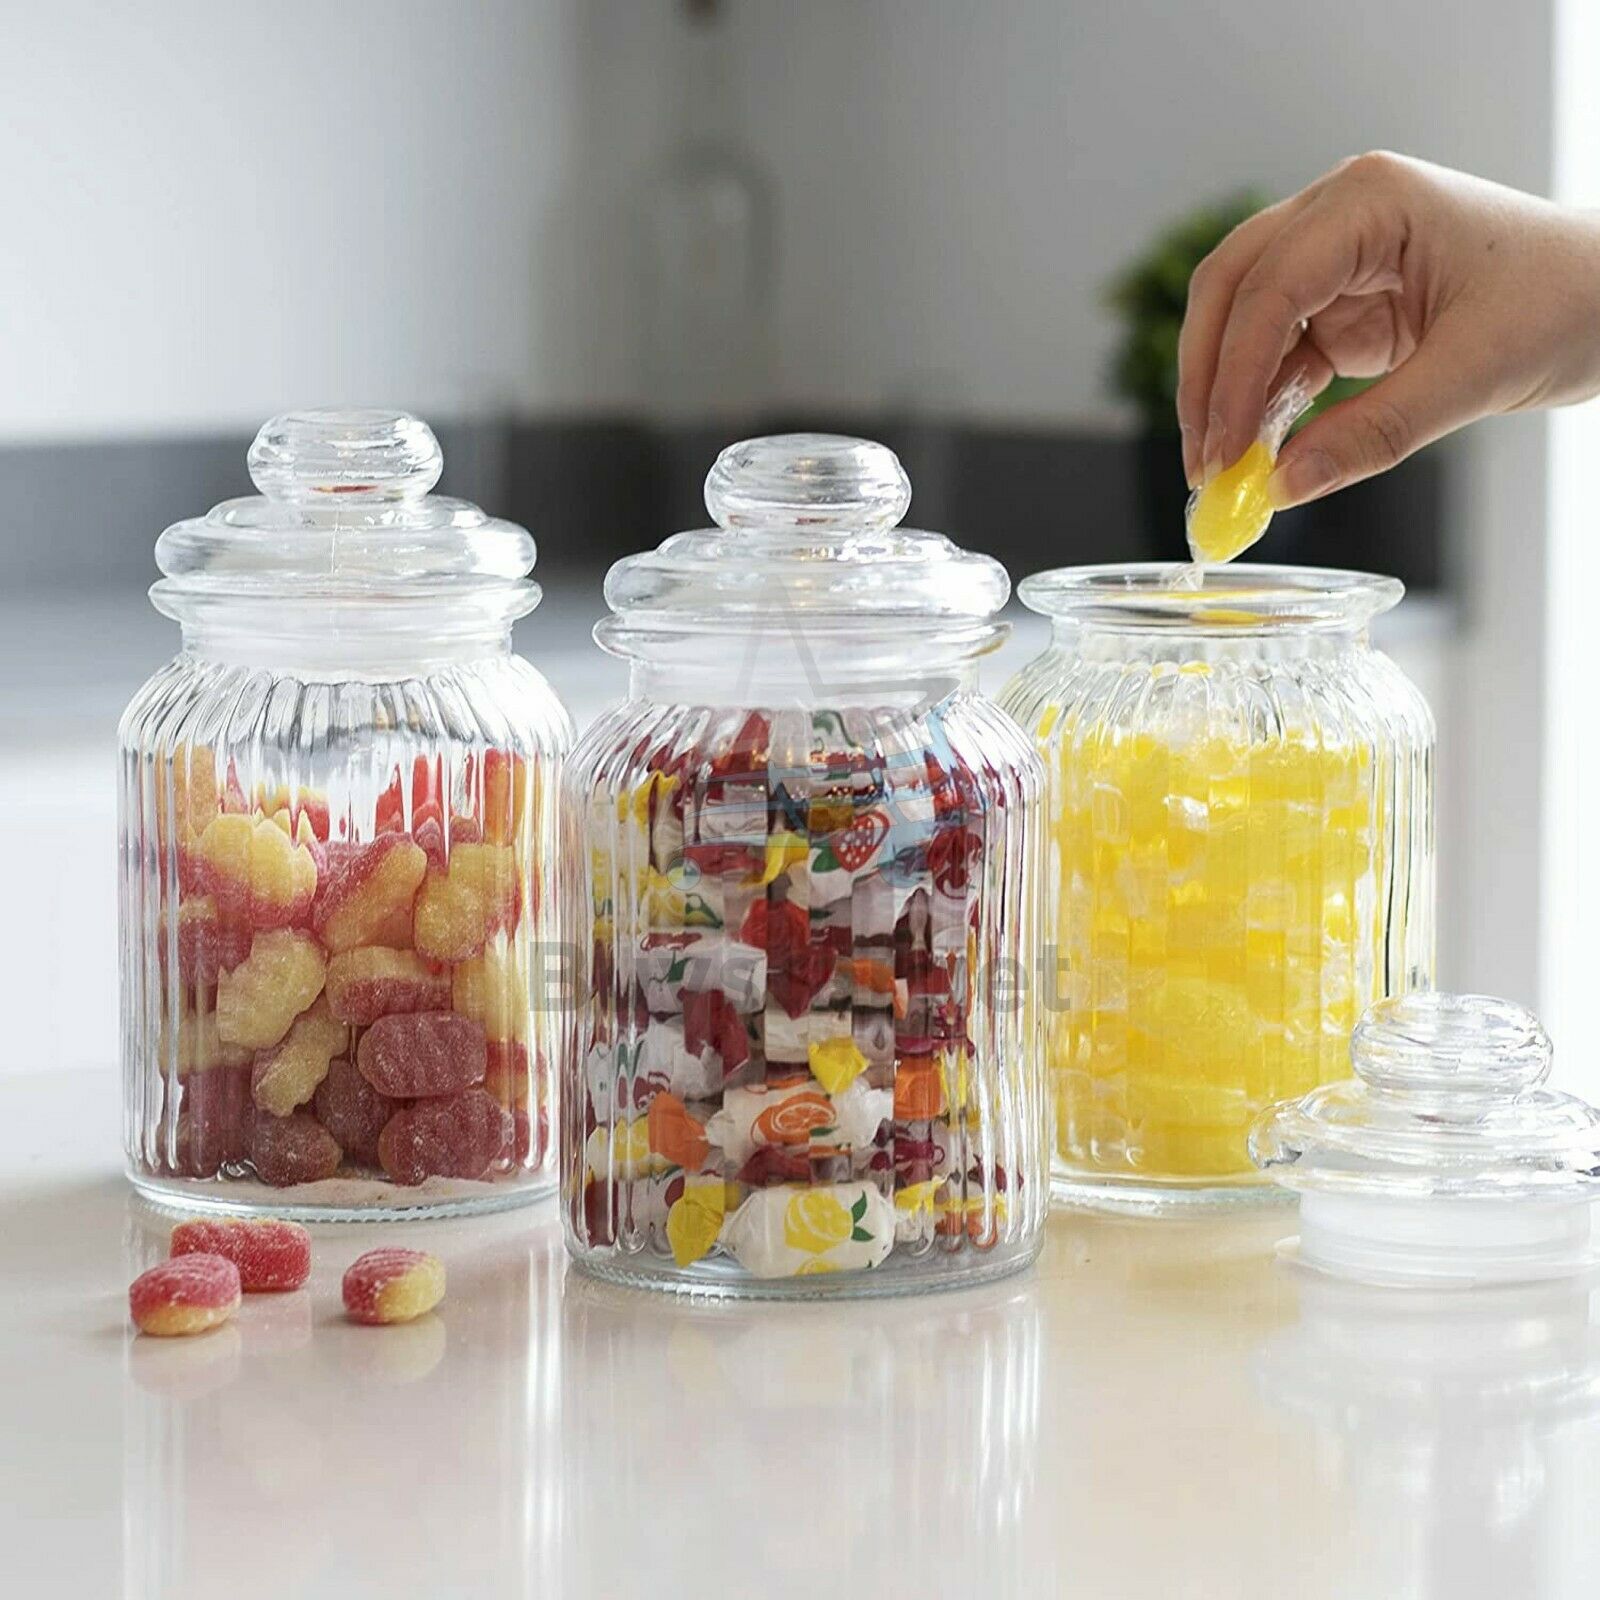 Retro 1.3 Litre Ribbed Glass Storage Jar Airtight Biscuit Cookie Container  Pot